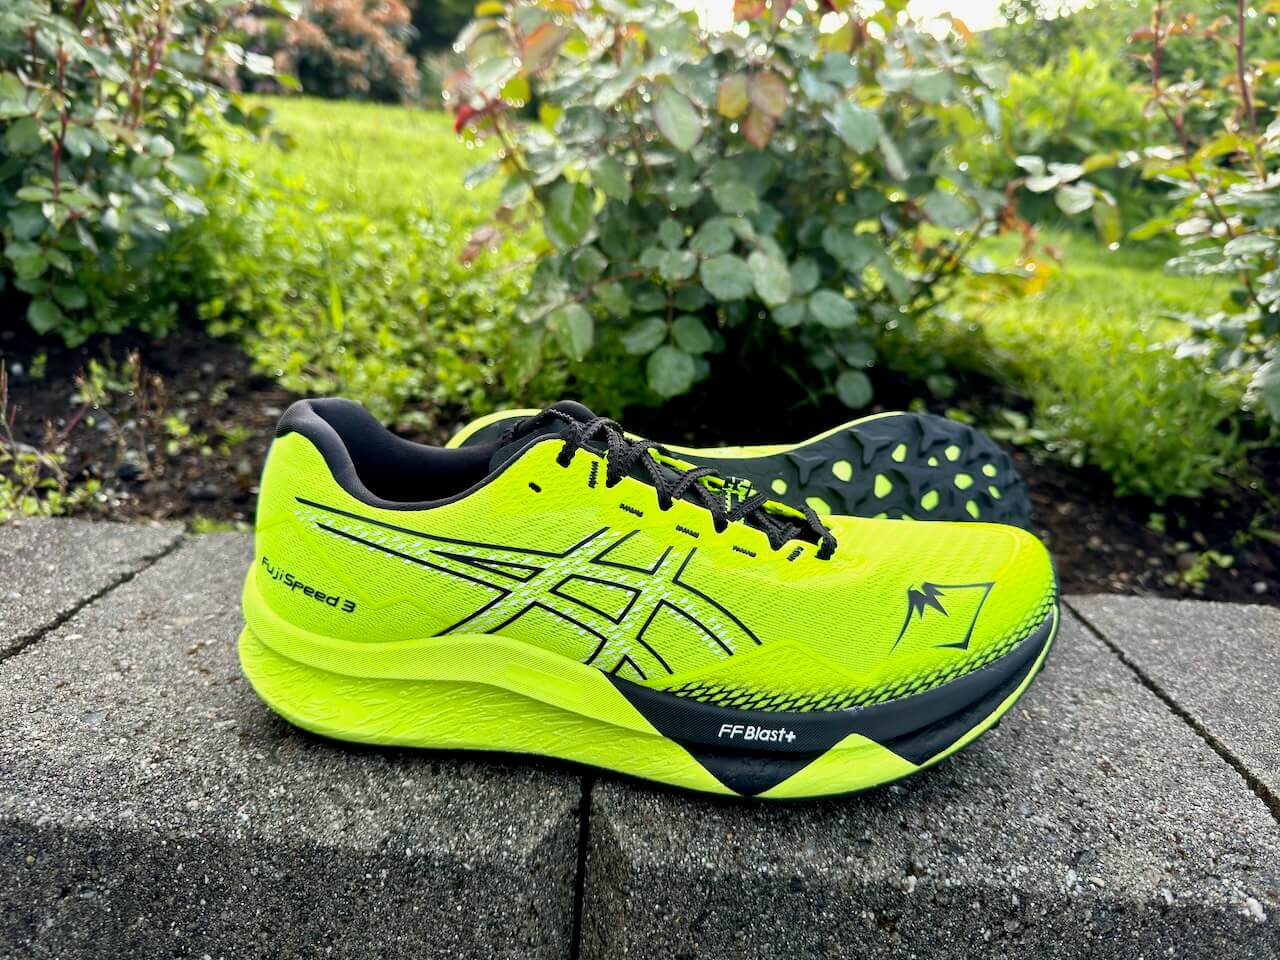 Featured image for “Test: ASICS Fuji Speed 3”